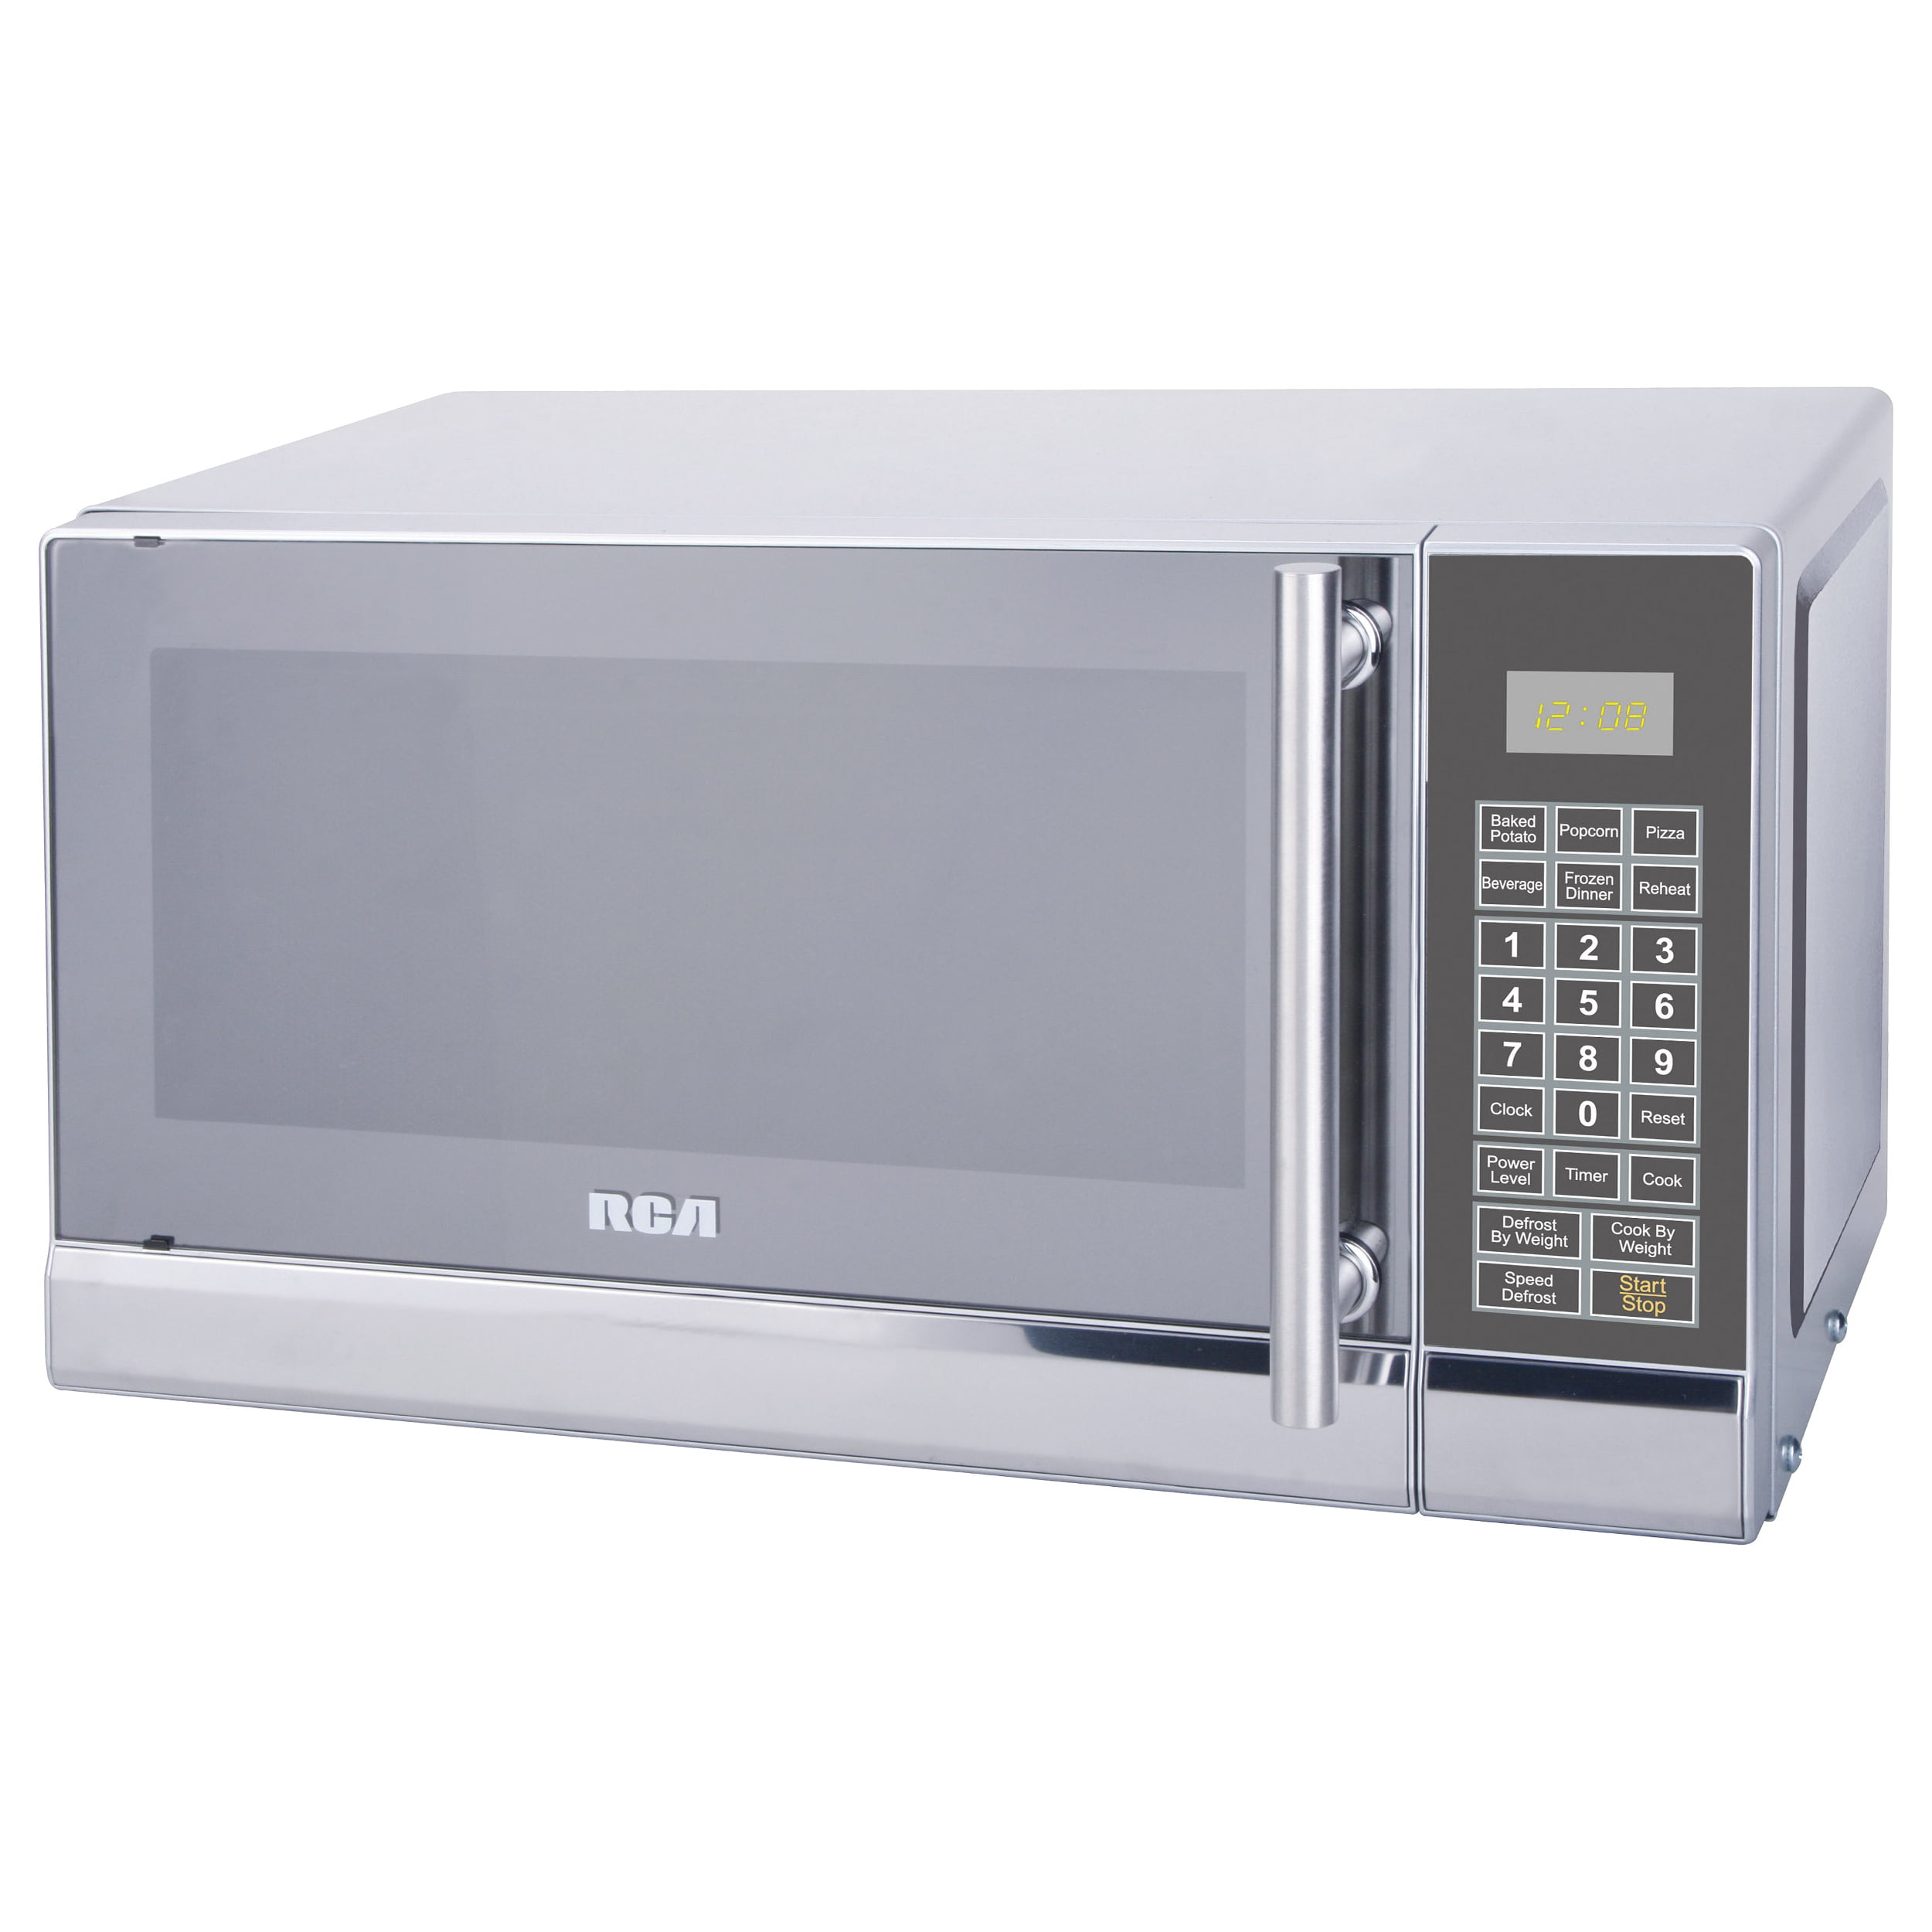 Rca 700 Watts 0 7 Cu Ft Stainless Microwave Rmw741 Stainless